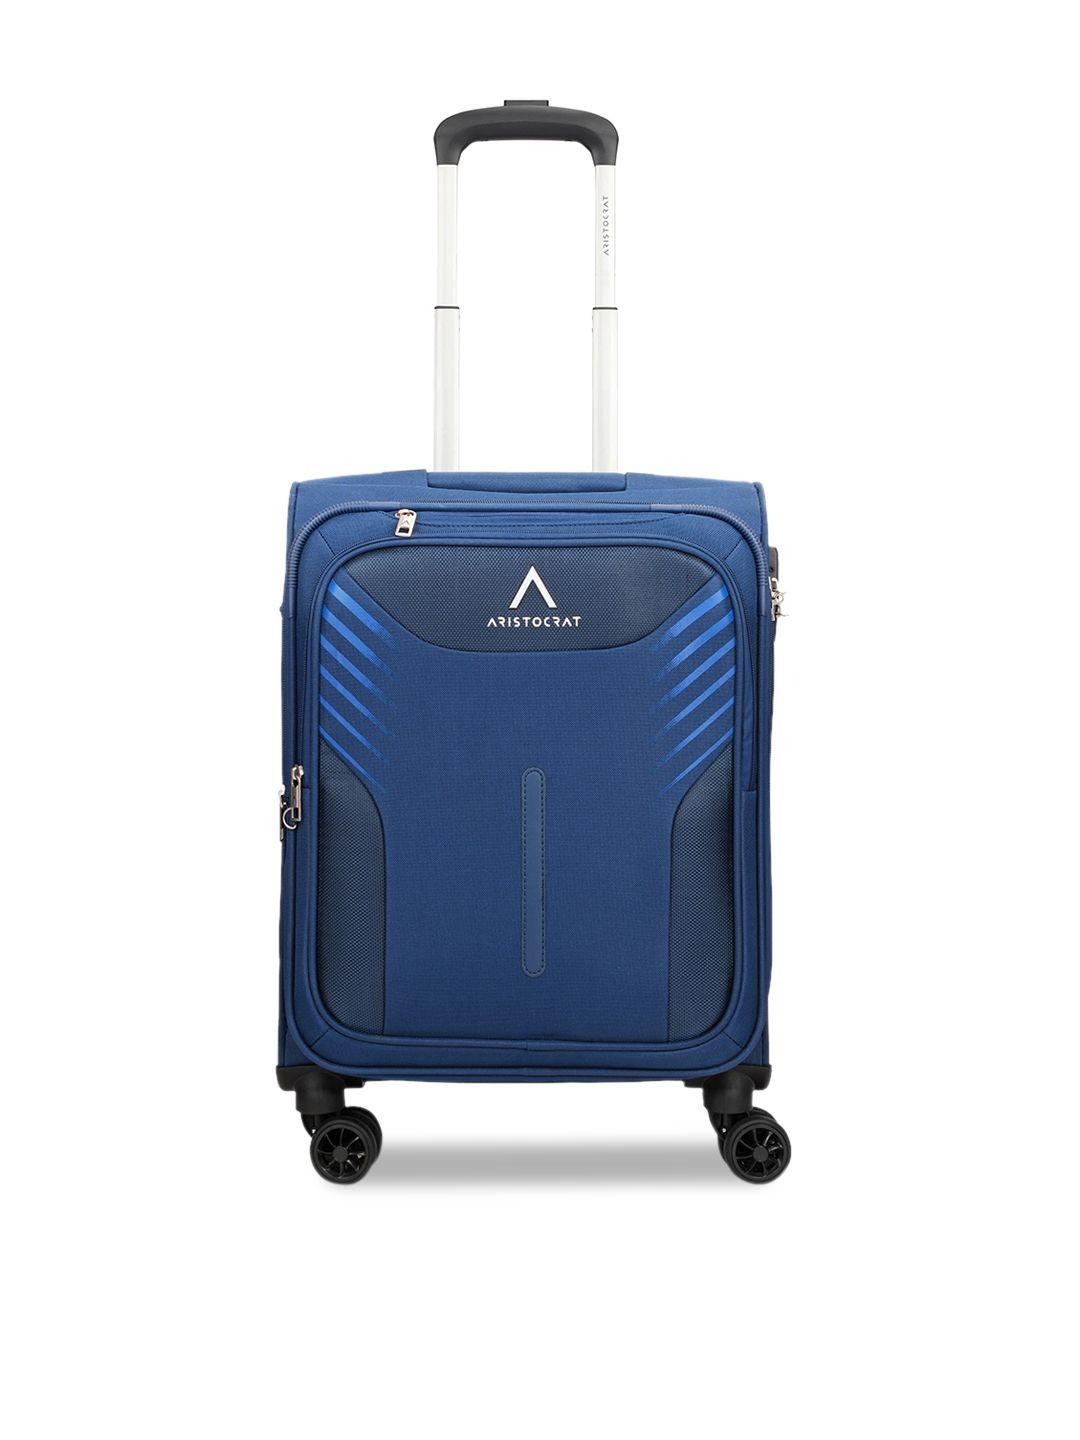 aristocrat soft-sided trolley suitcases